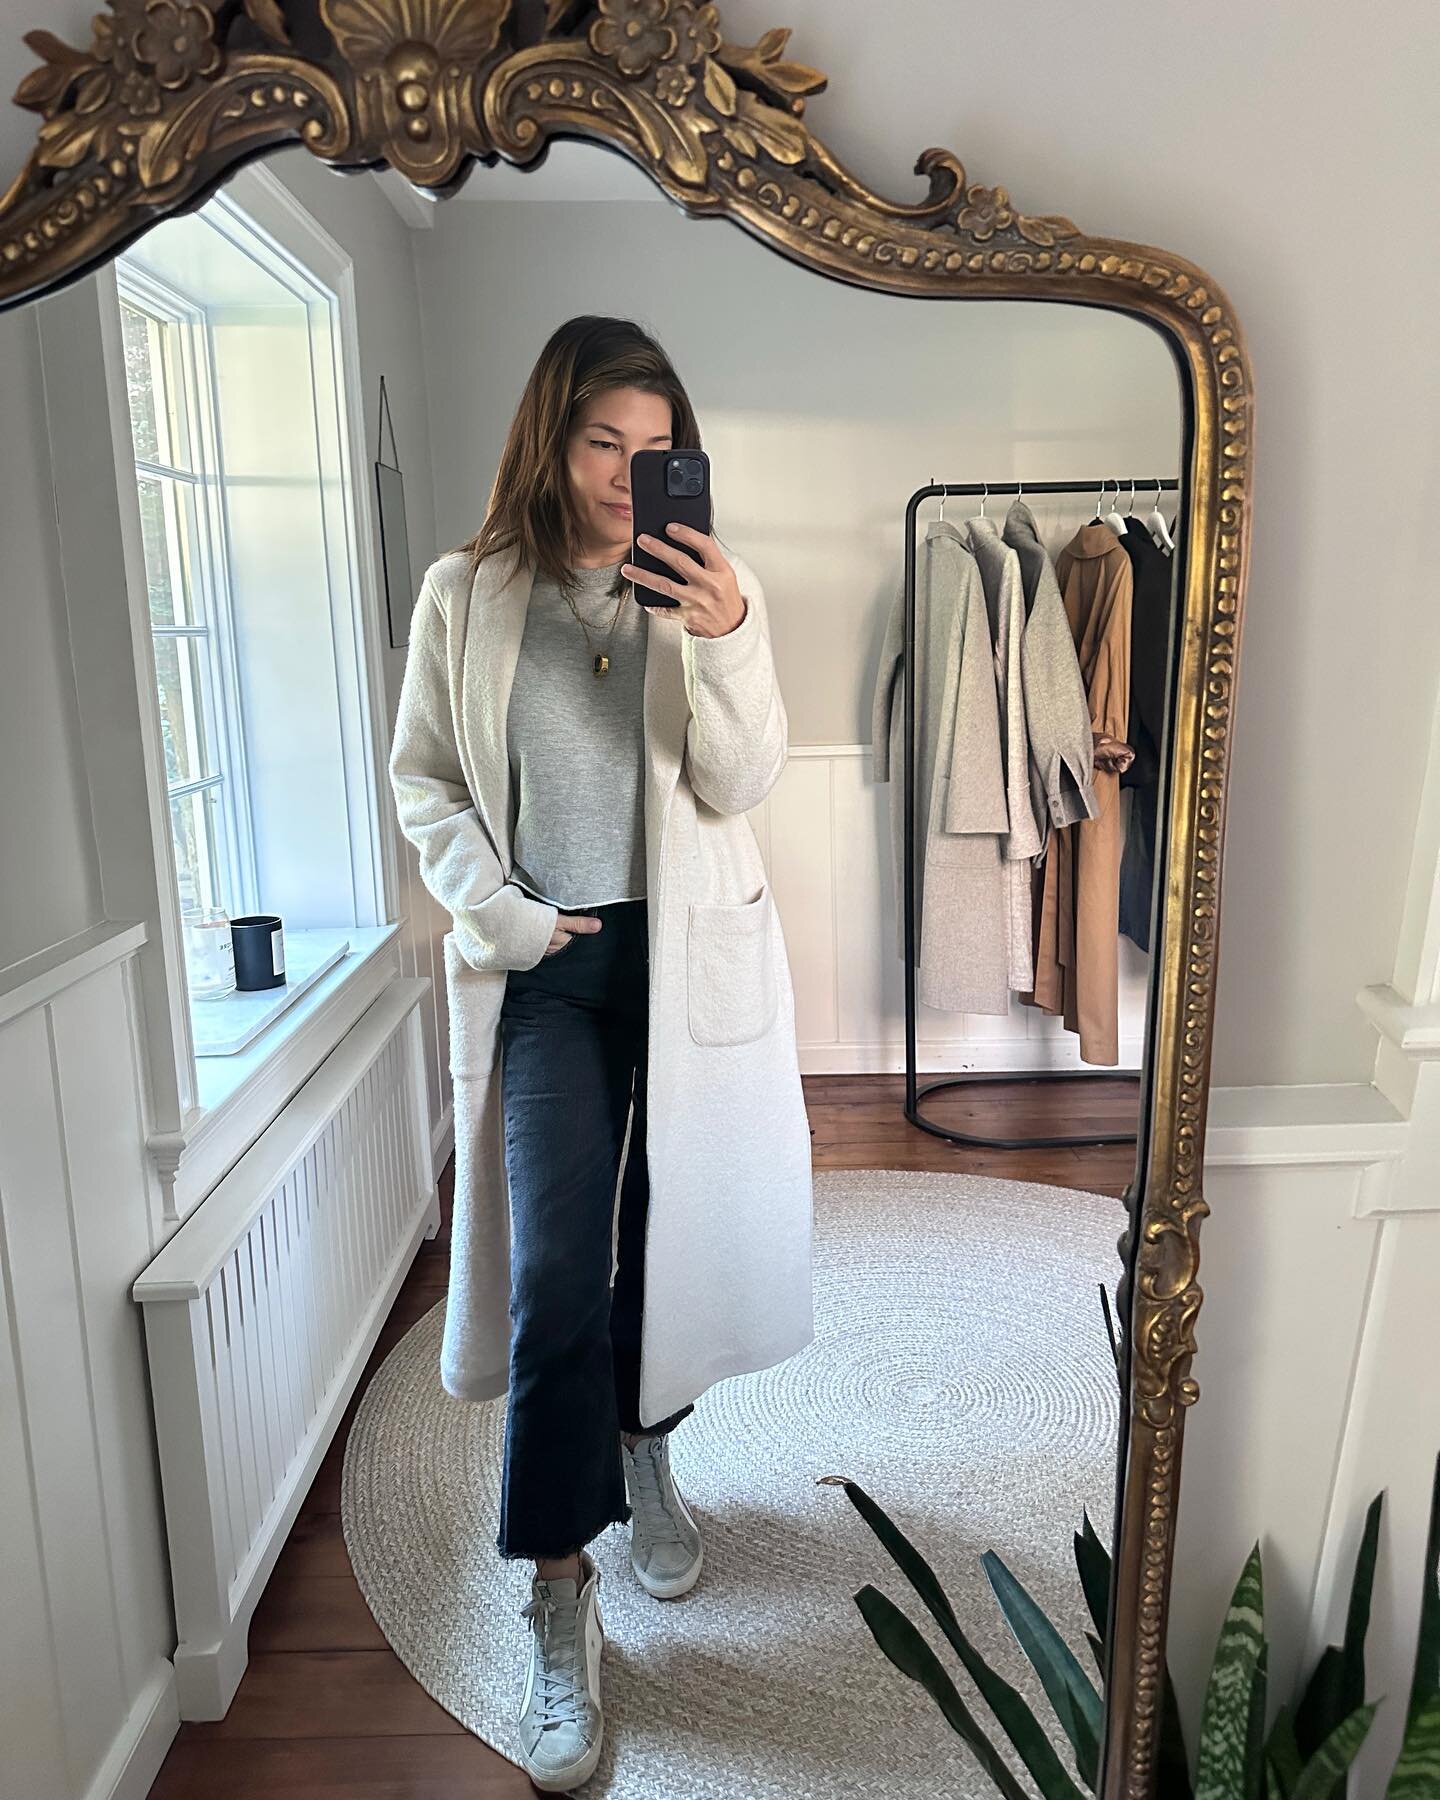 The silver lining to the start of cold fall weather will always be my cozy sweater coat.🤍 It&rsquo;s kind of like a chic white robe that I can wear outside. #nothingbetter

Coat is by @aritzia. Will link in stories.

#elevatetheeveryday #basics #war